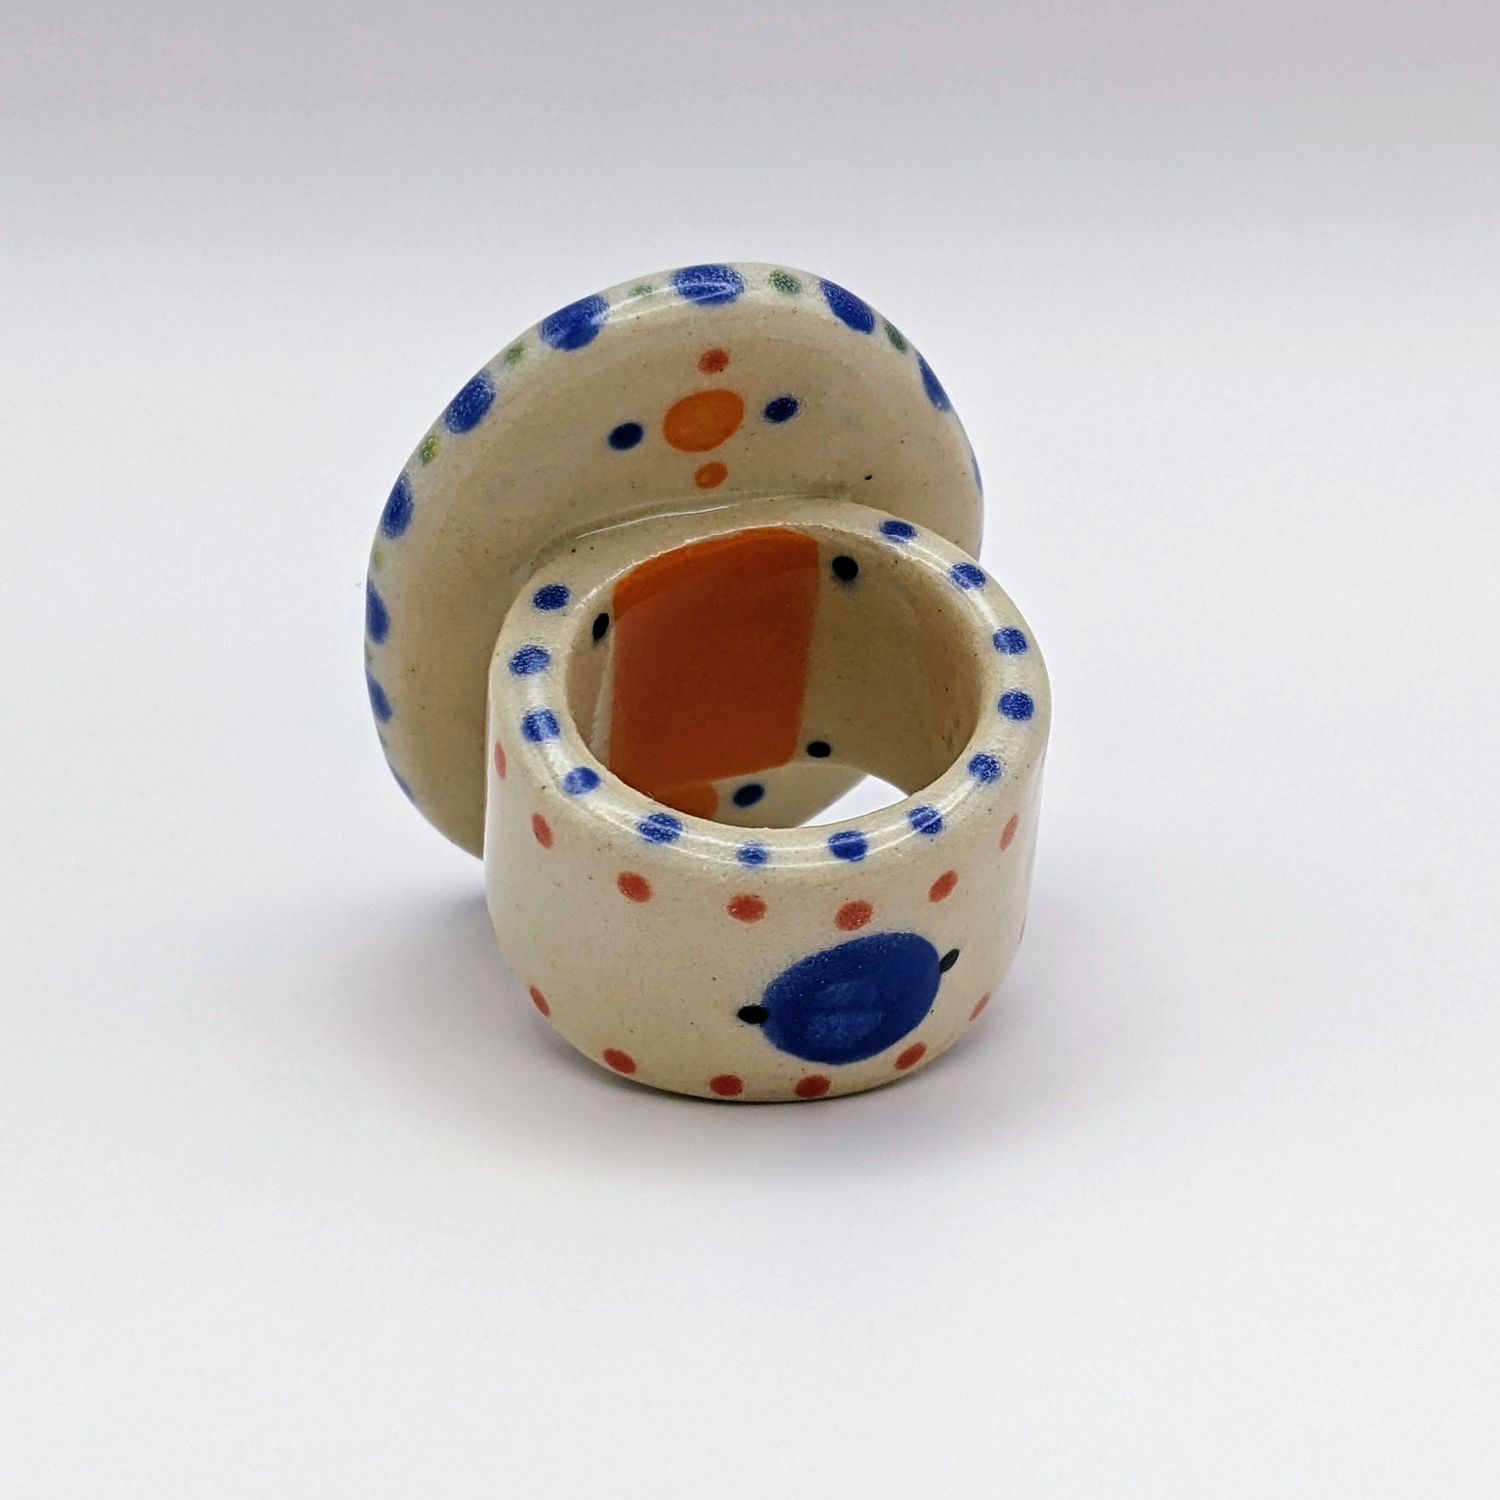 Here and Here: Blue Dot Ceramic Ring – Medium Product Image 2 of 2